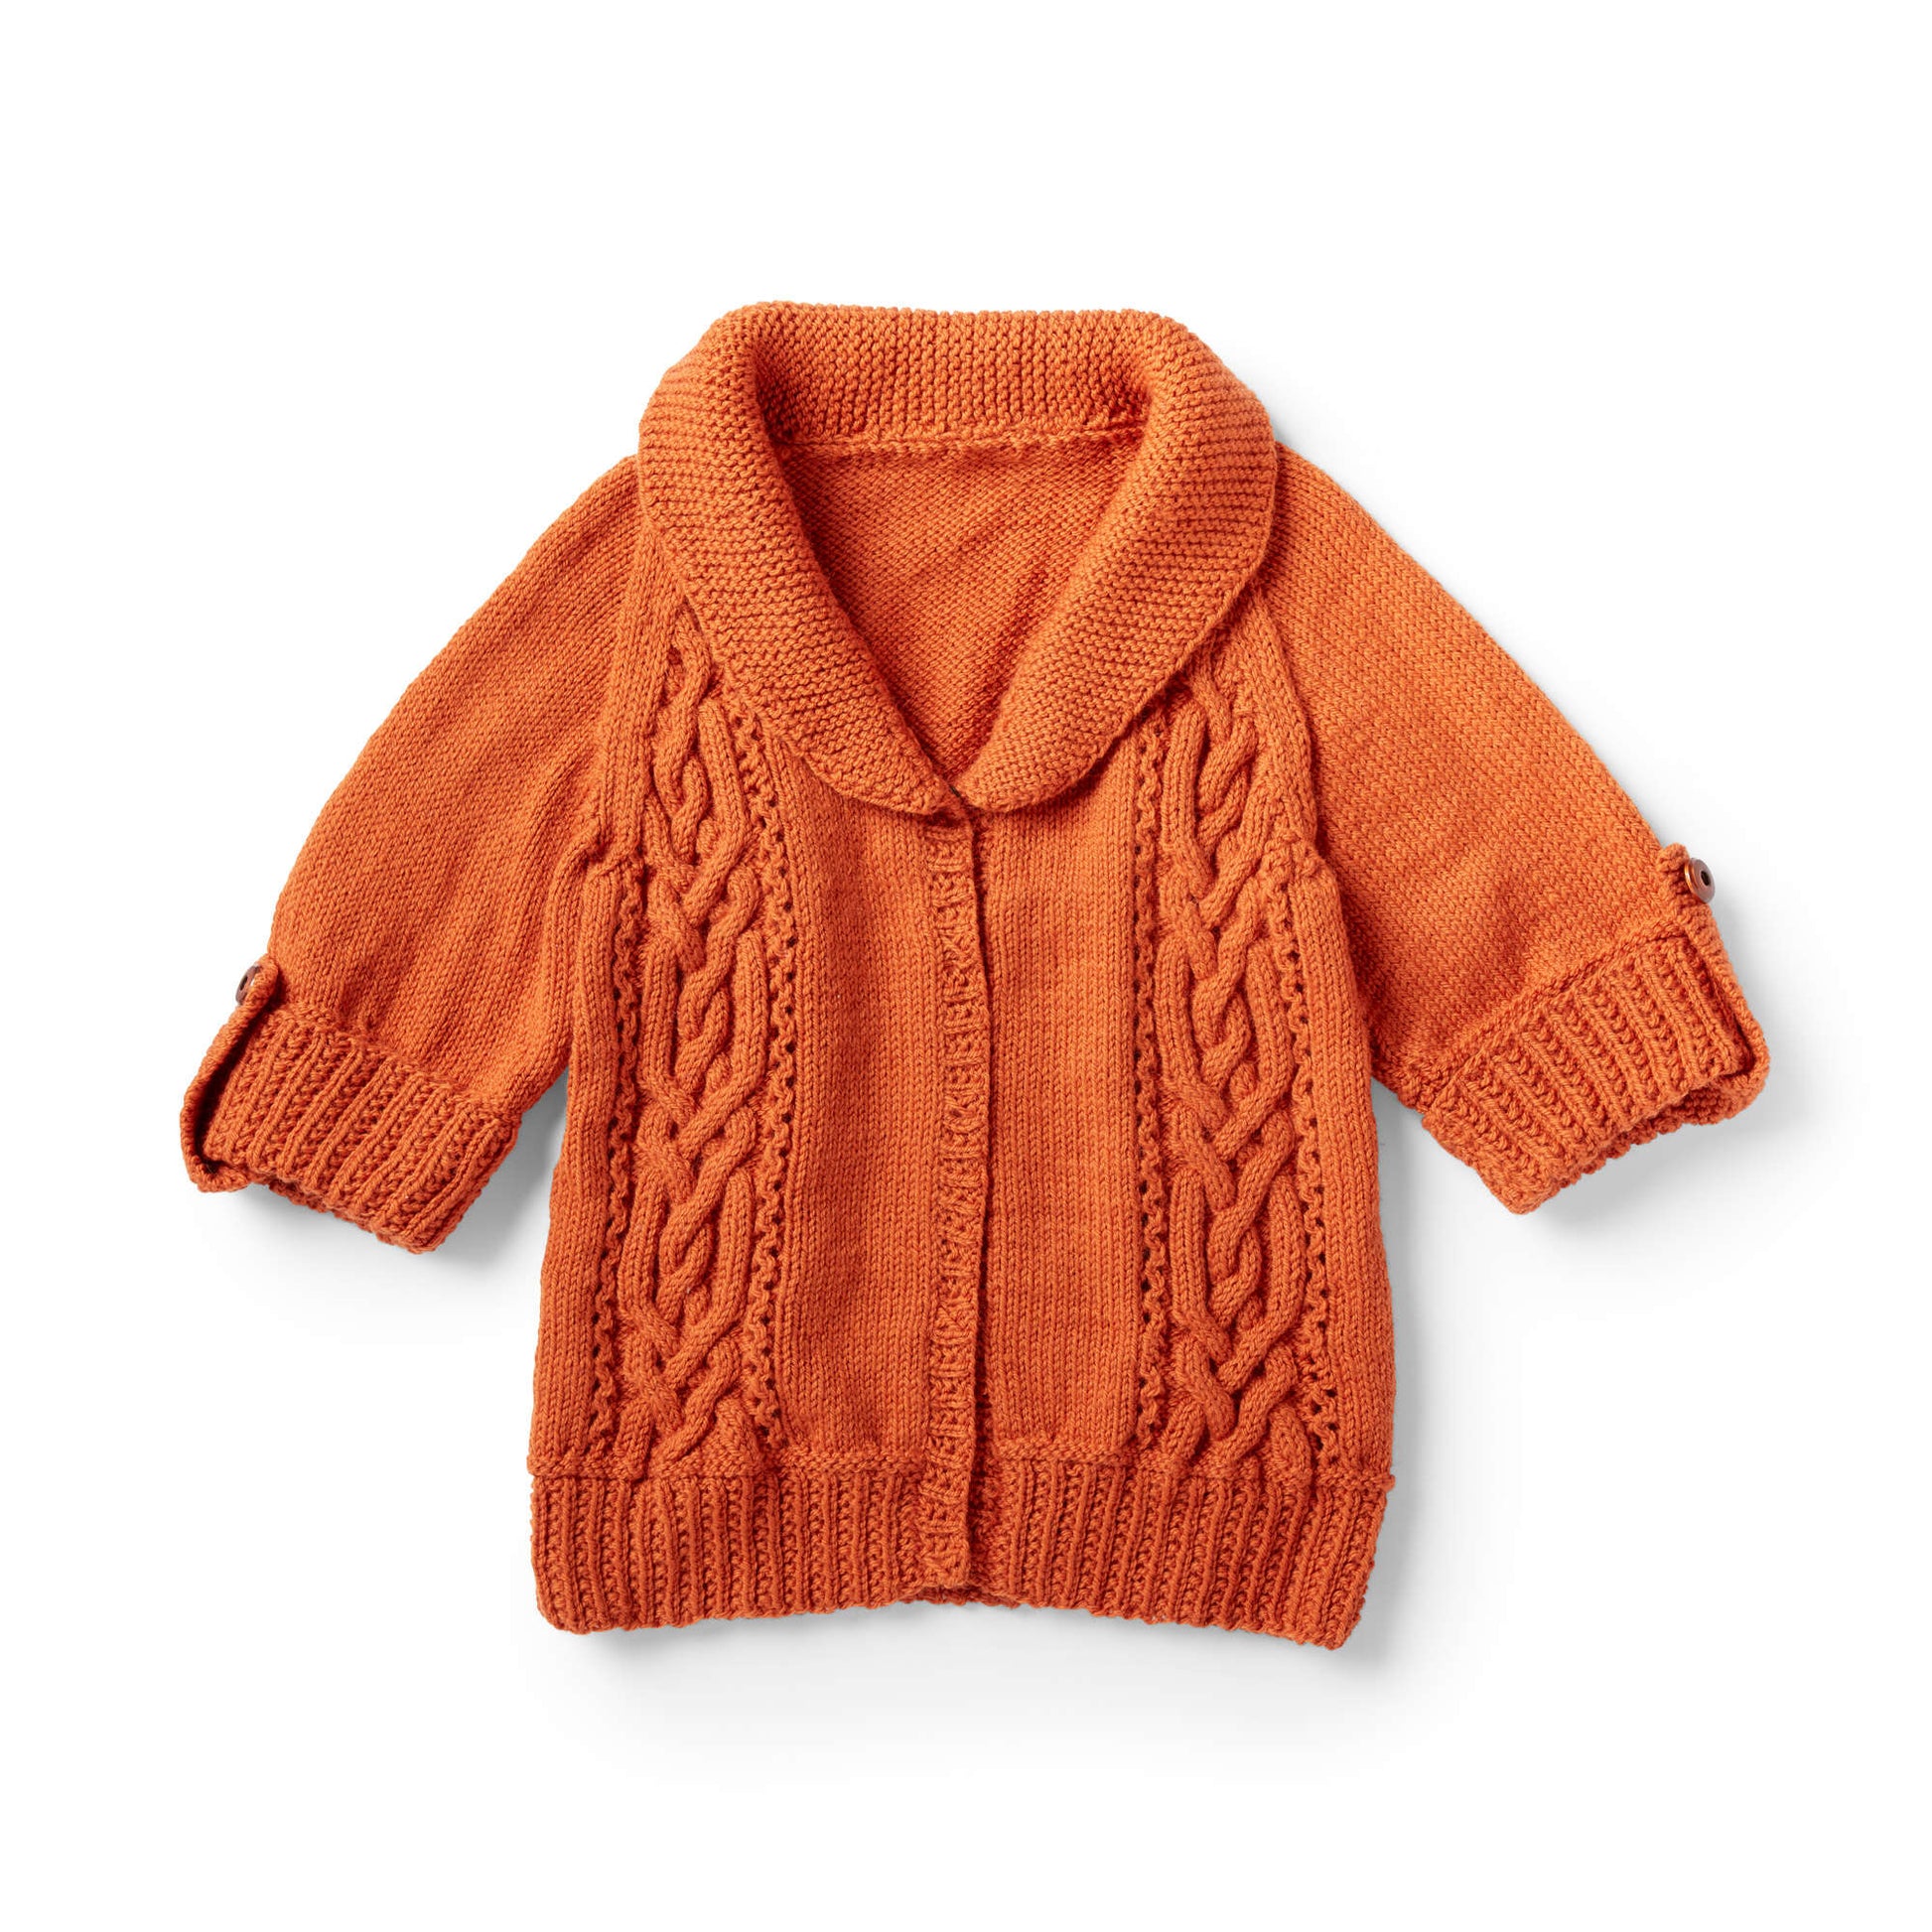 Free Patons Cables And Collar Knit Cardigan Pattern